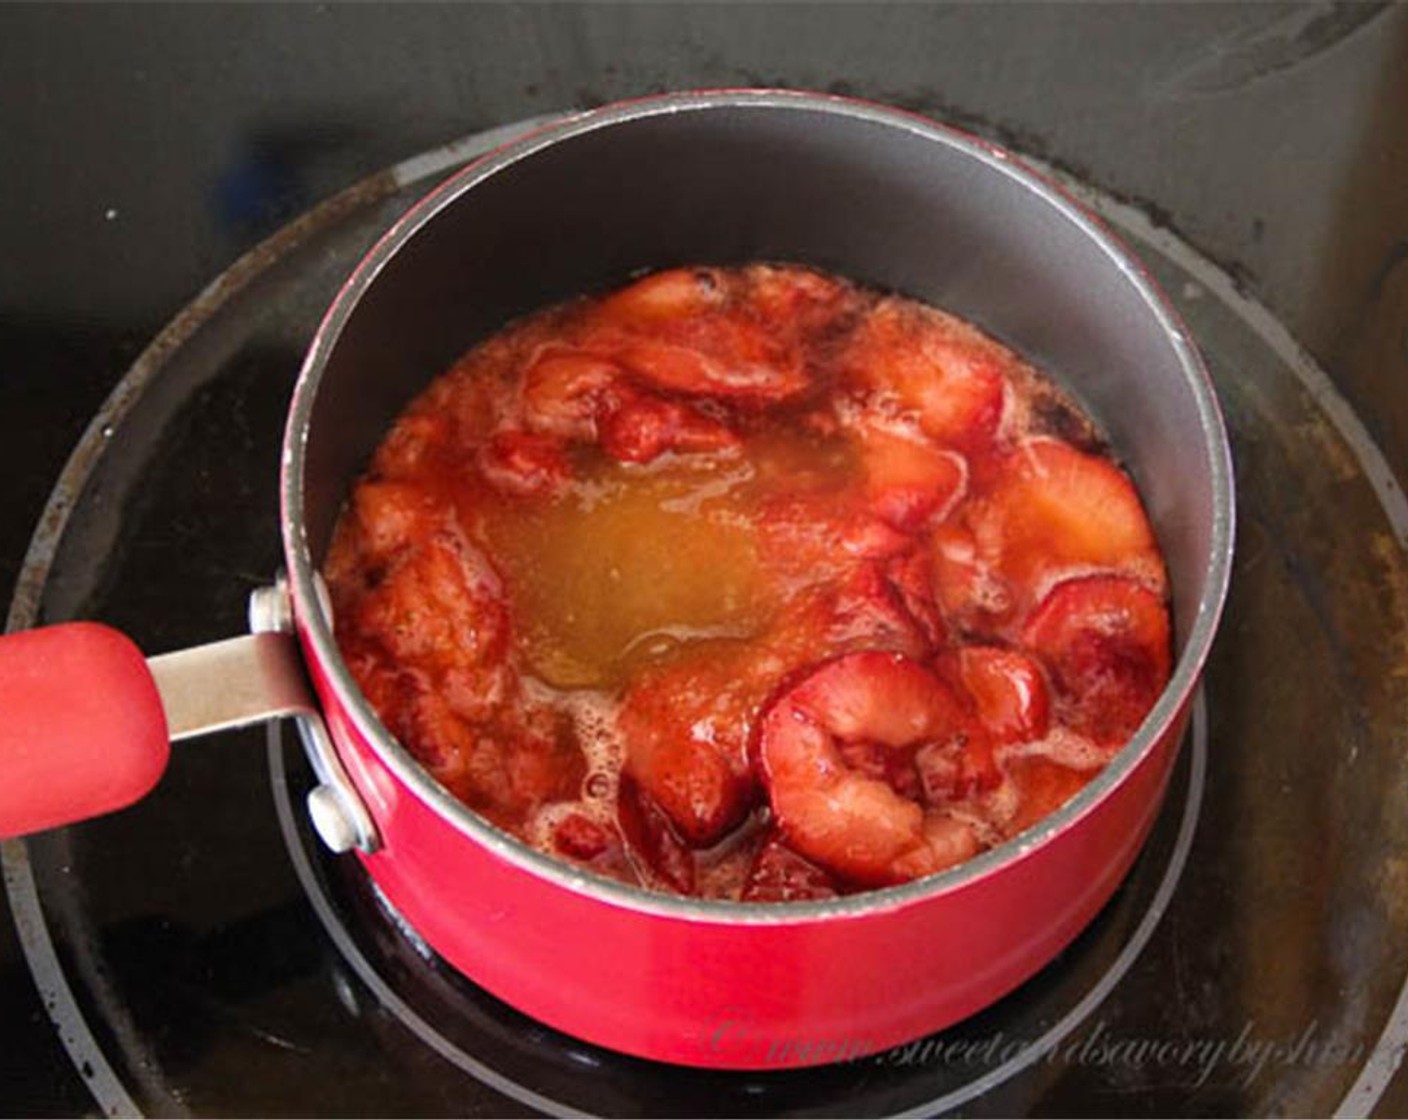 step 10 To make the strawberry sauce, in a small saucepan combine Fresh Strawberry (1 cup)  and Honey (2 Tbsp) and boil for about 5 minutes. Cool completely.